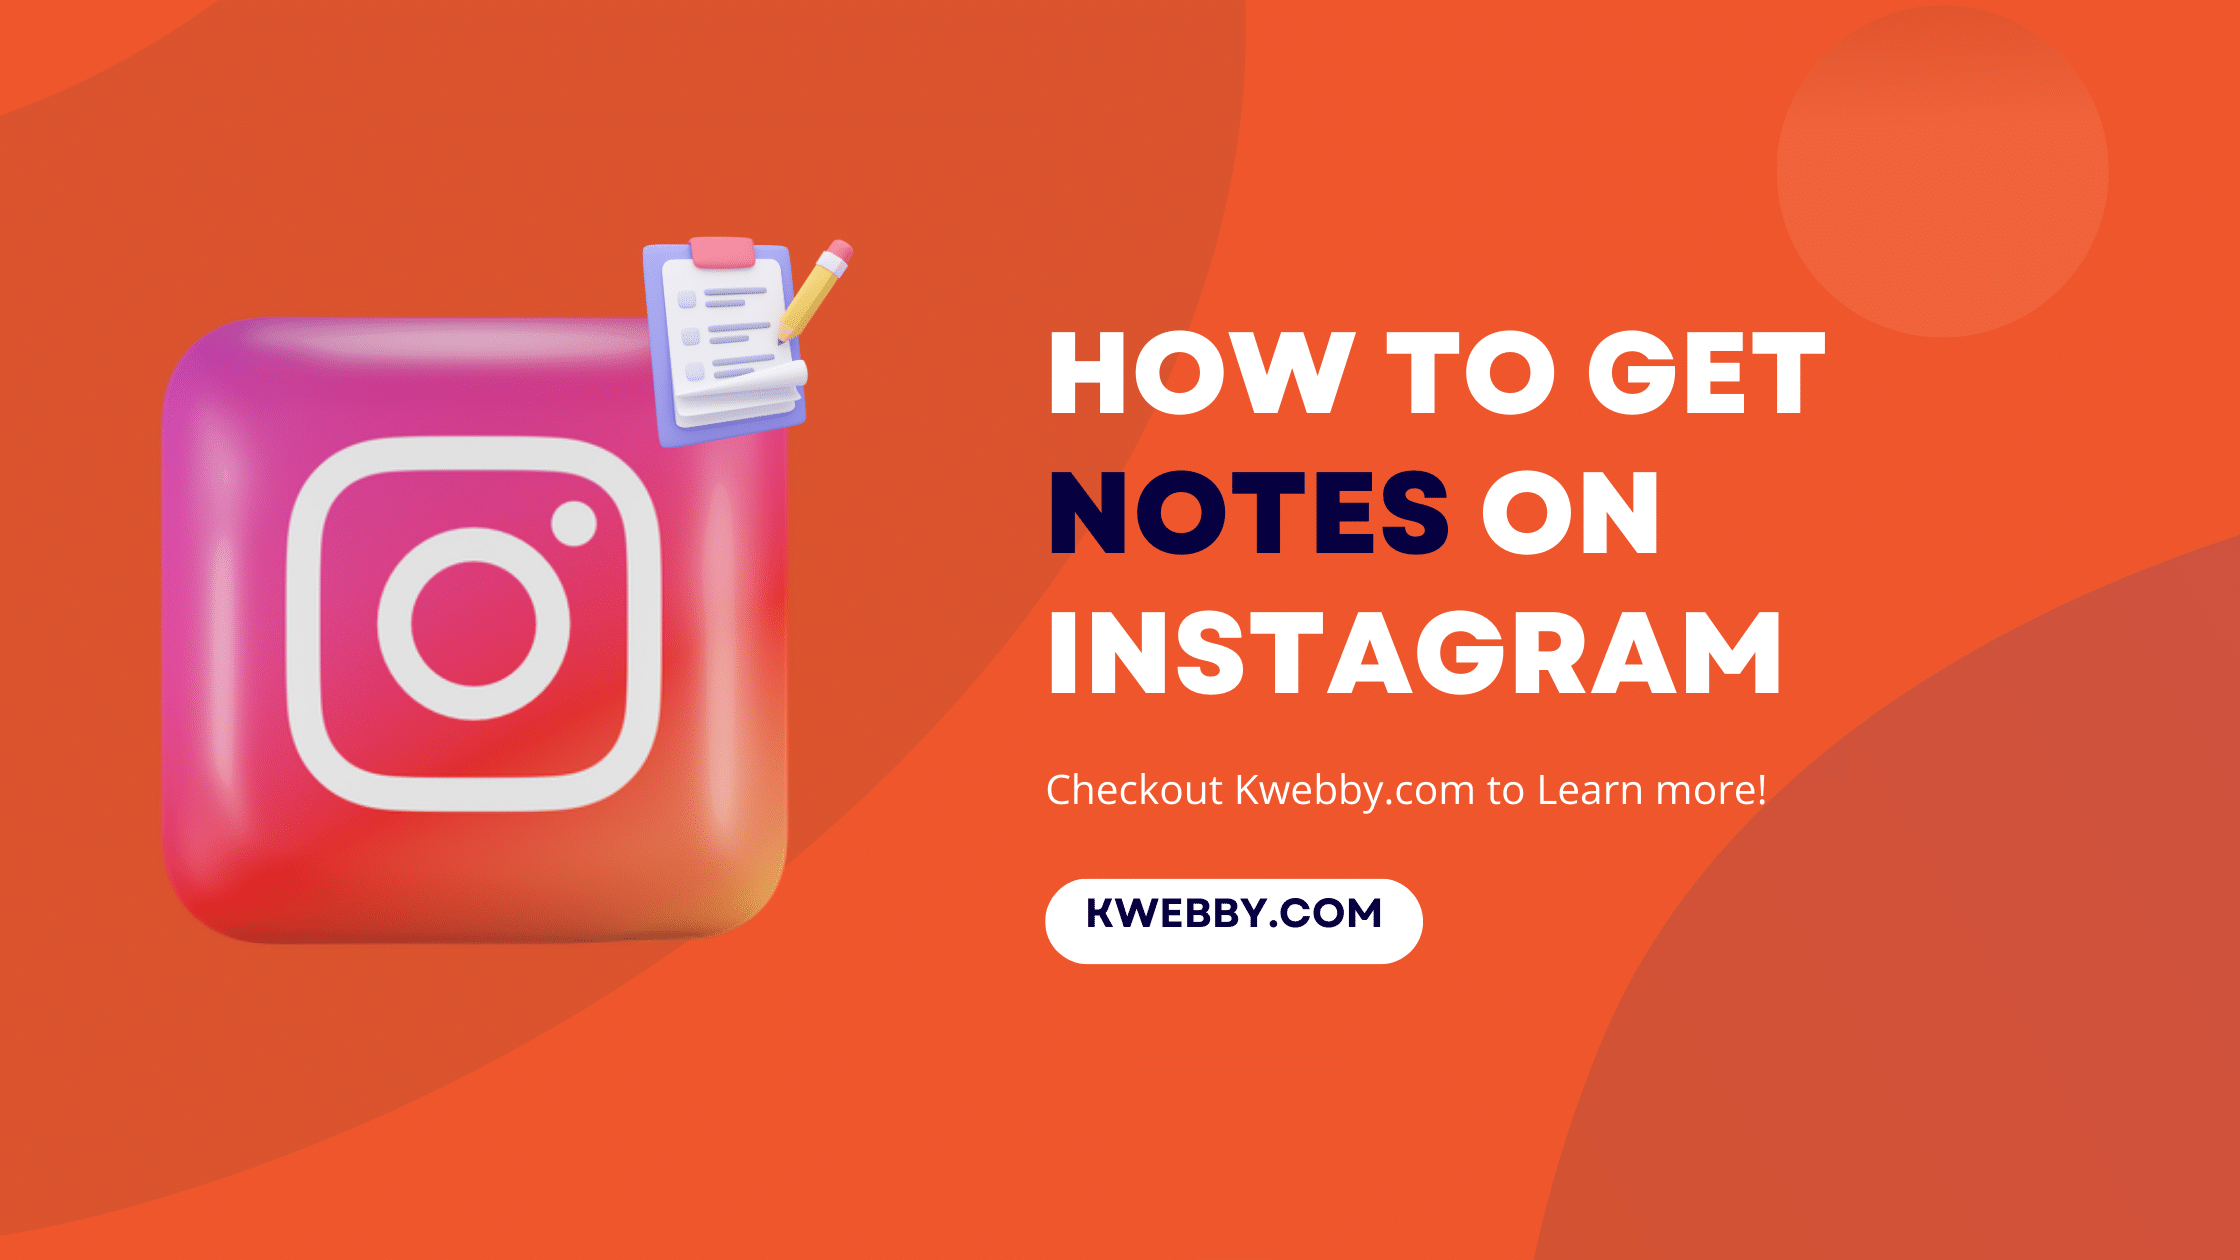 How to Get Notes on Instagram in 2 Simple Steps